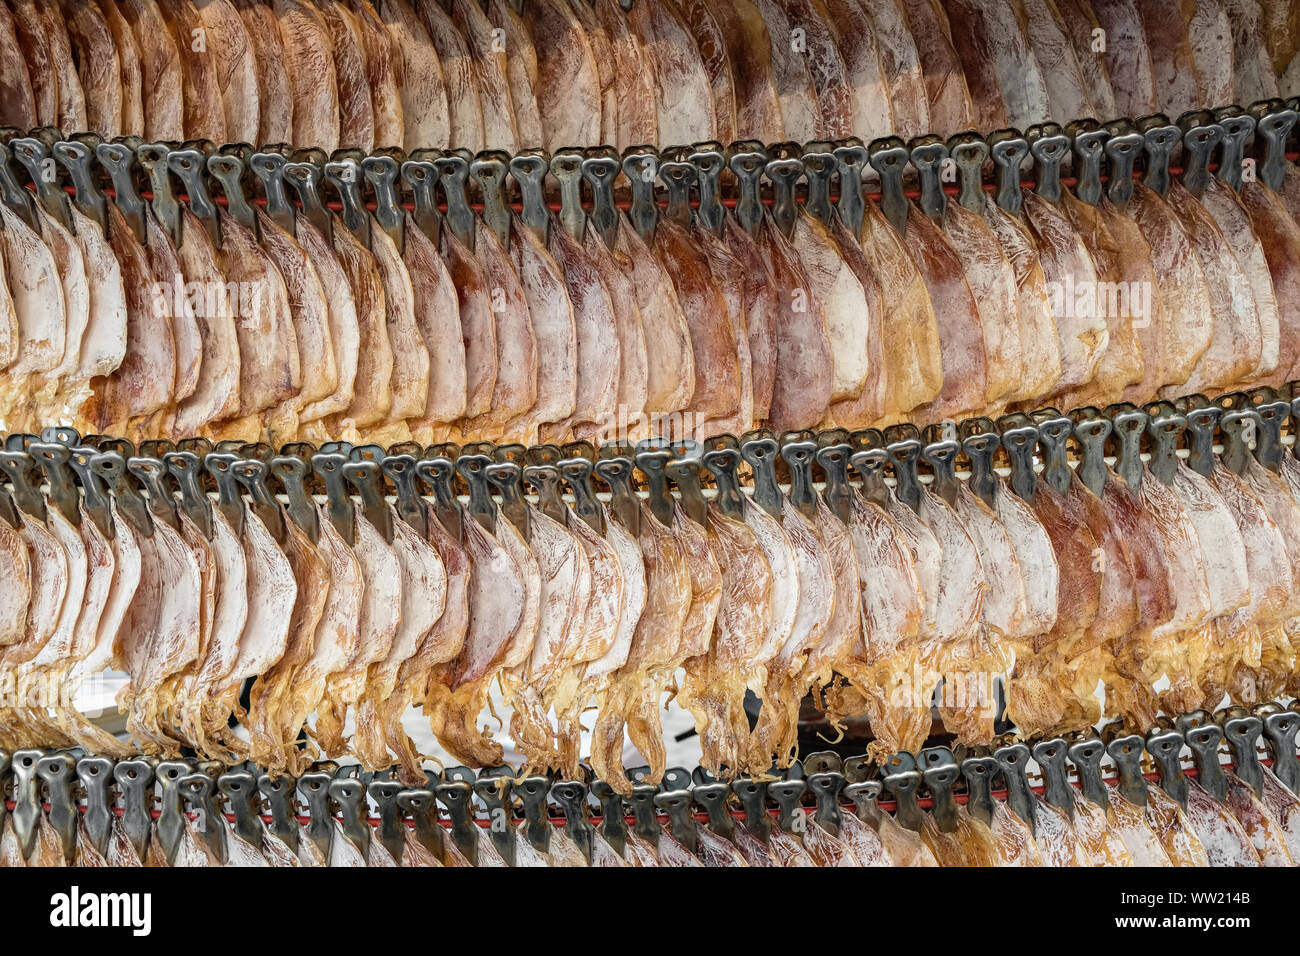 Dried squid, traditional thai drying squids close-up at market stall in Thailand. Seafood background Stock Photo